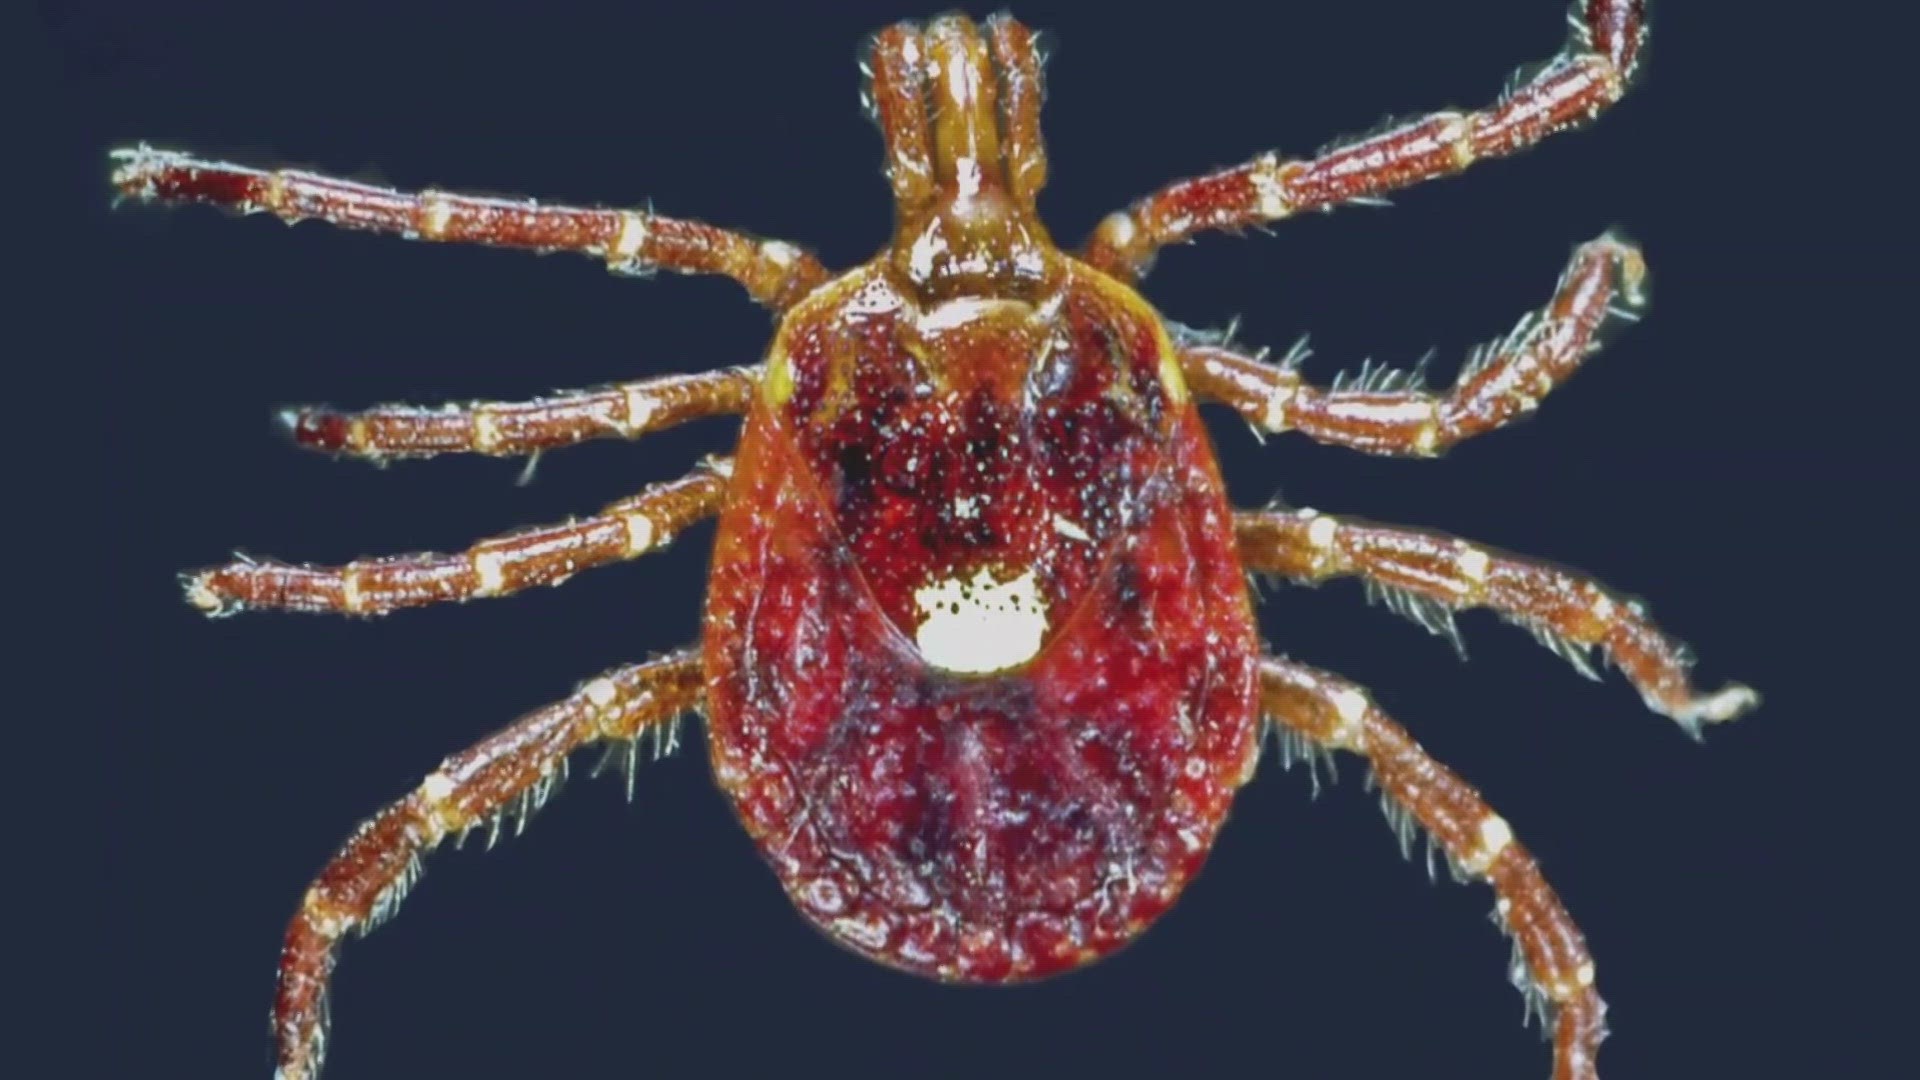 Mainers are urged to take precautions as cases of tick-borne illness are on the rise.